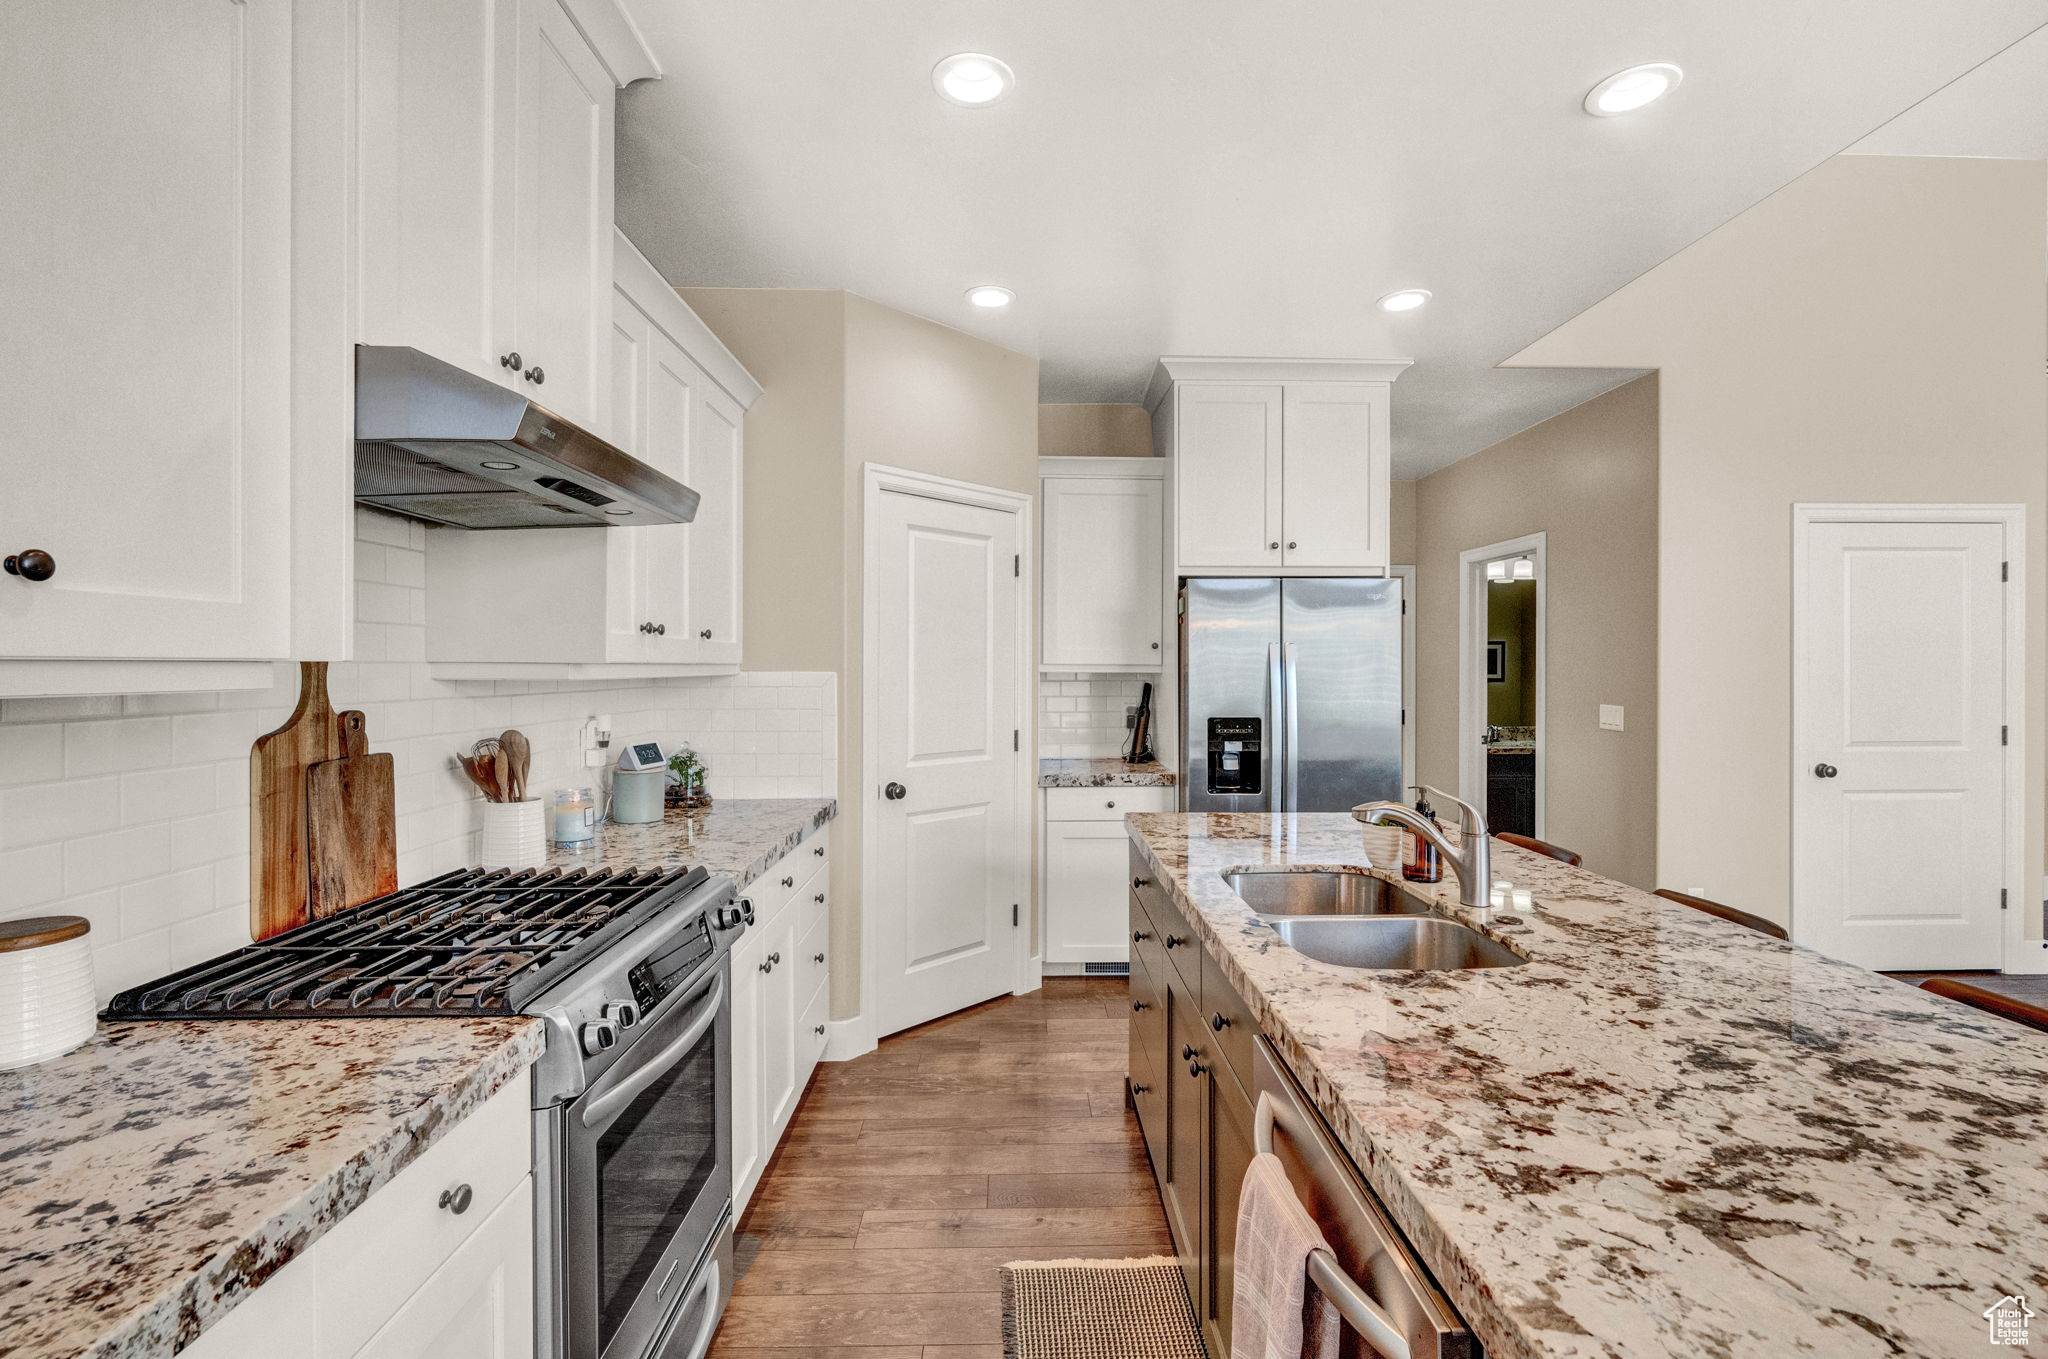 Kitchen featuring white cabinetry, appliances with stainless steel finishes, sink, tasteful backsplash, and hardwood / wood-style flooring